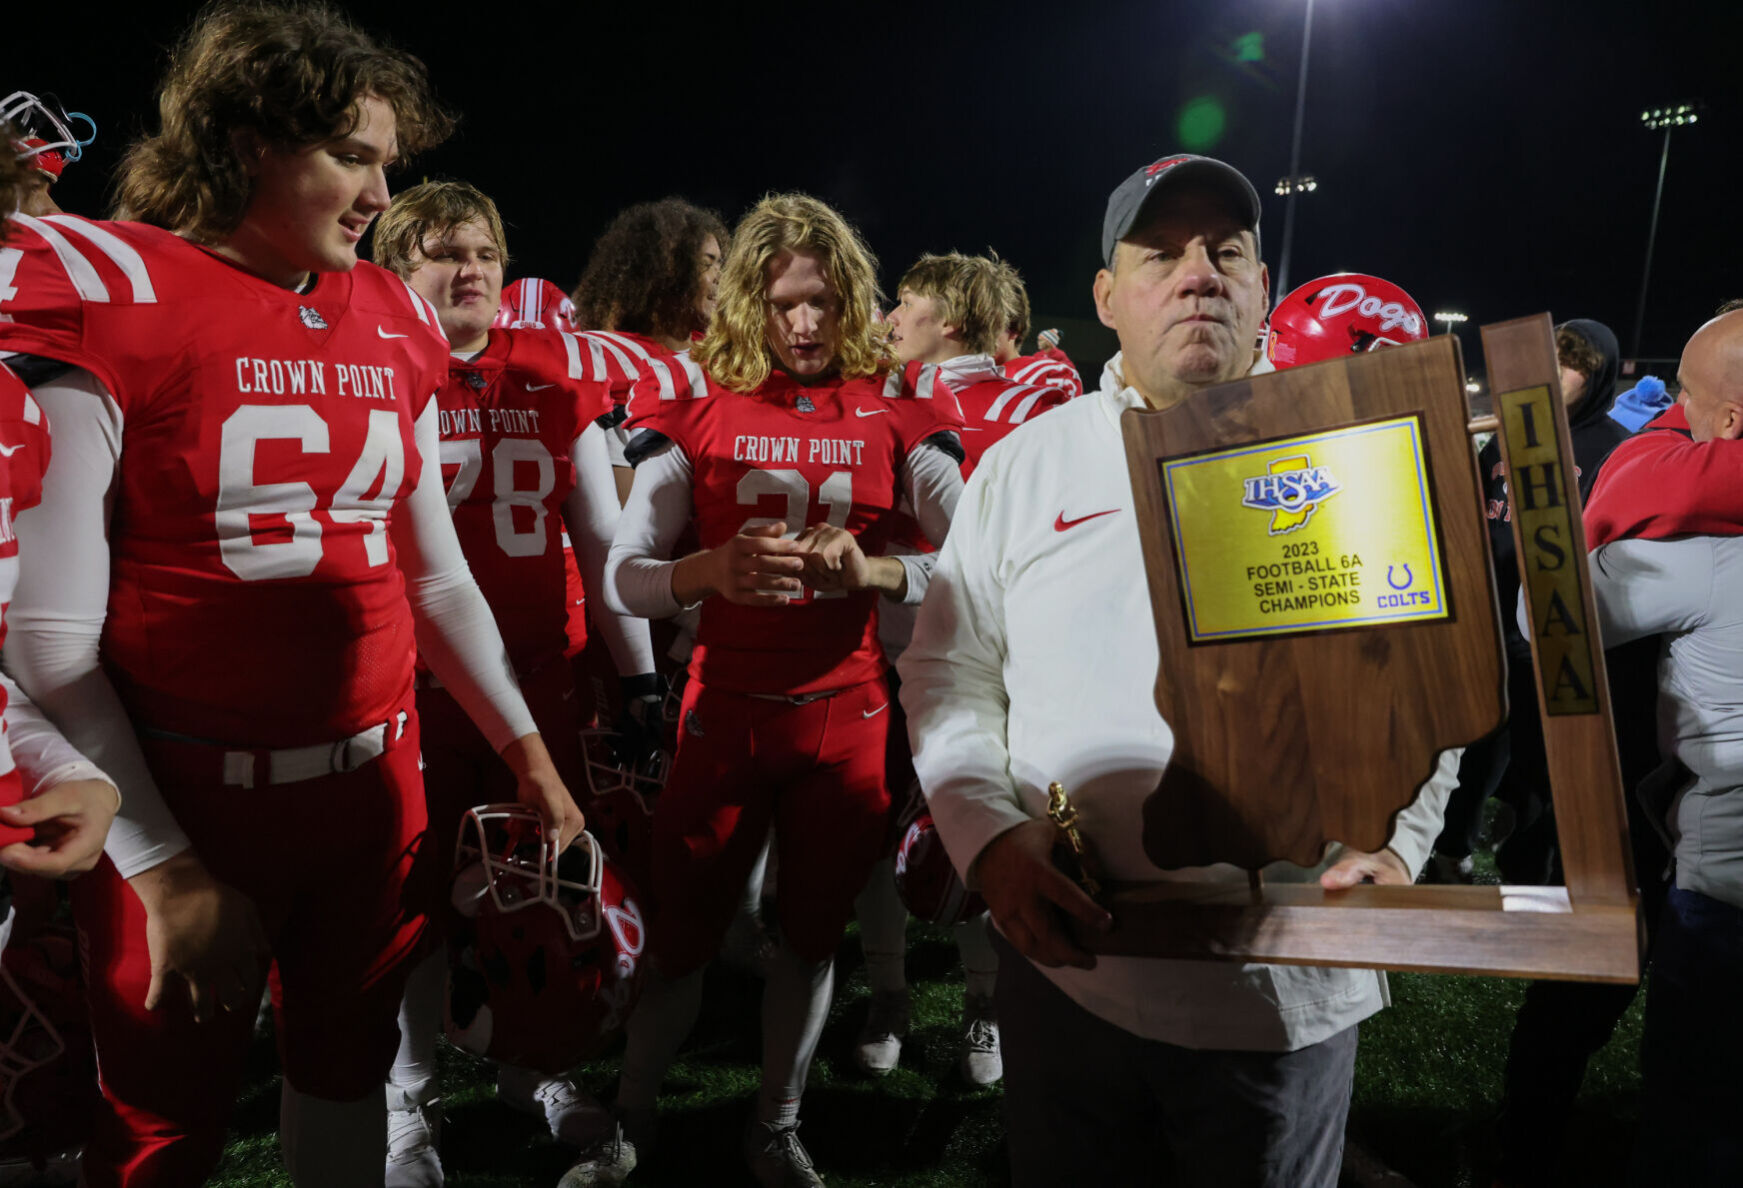 Crown Point’s Thrilling Double Overtime Win Sends Them to State Finals After 22 Years